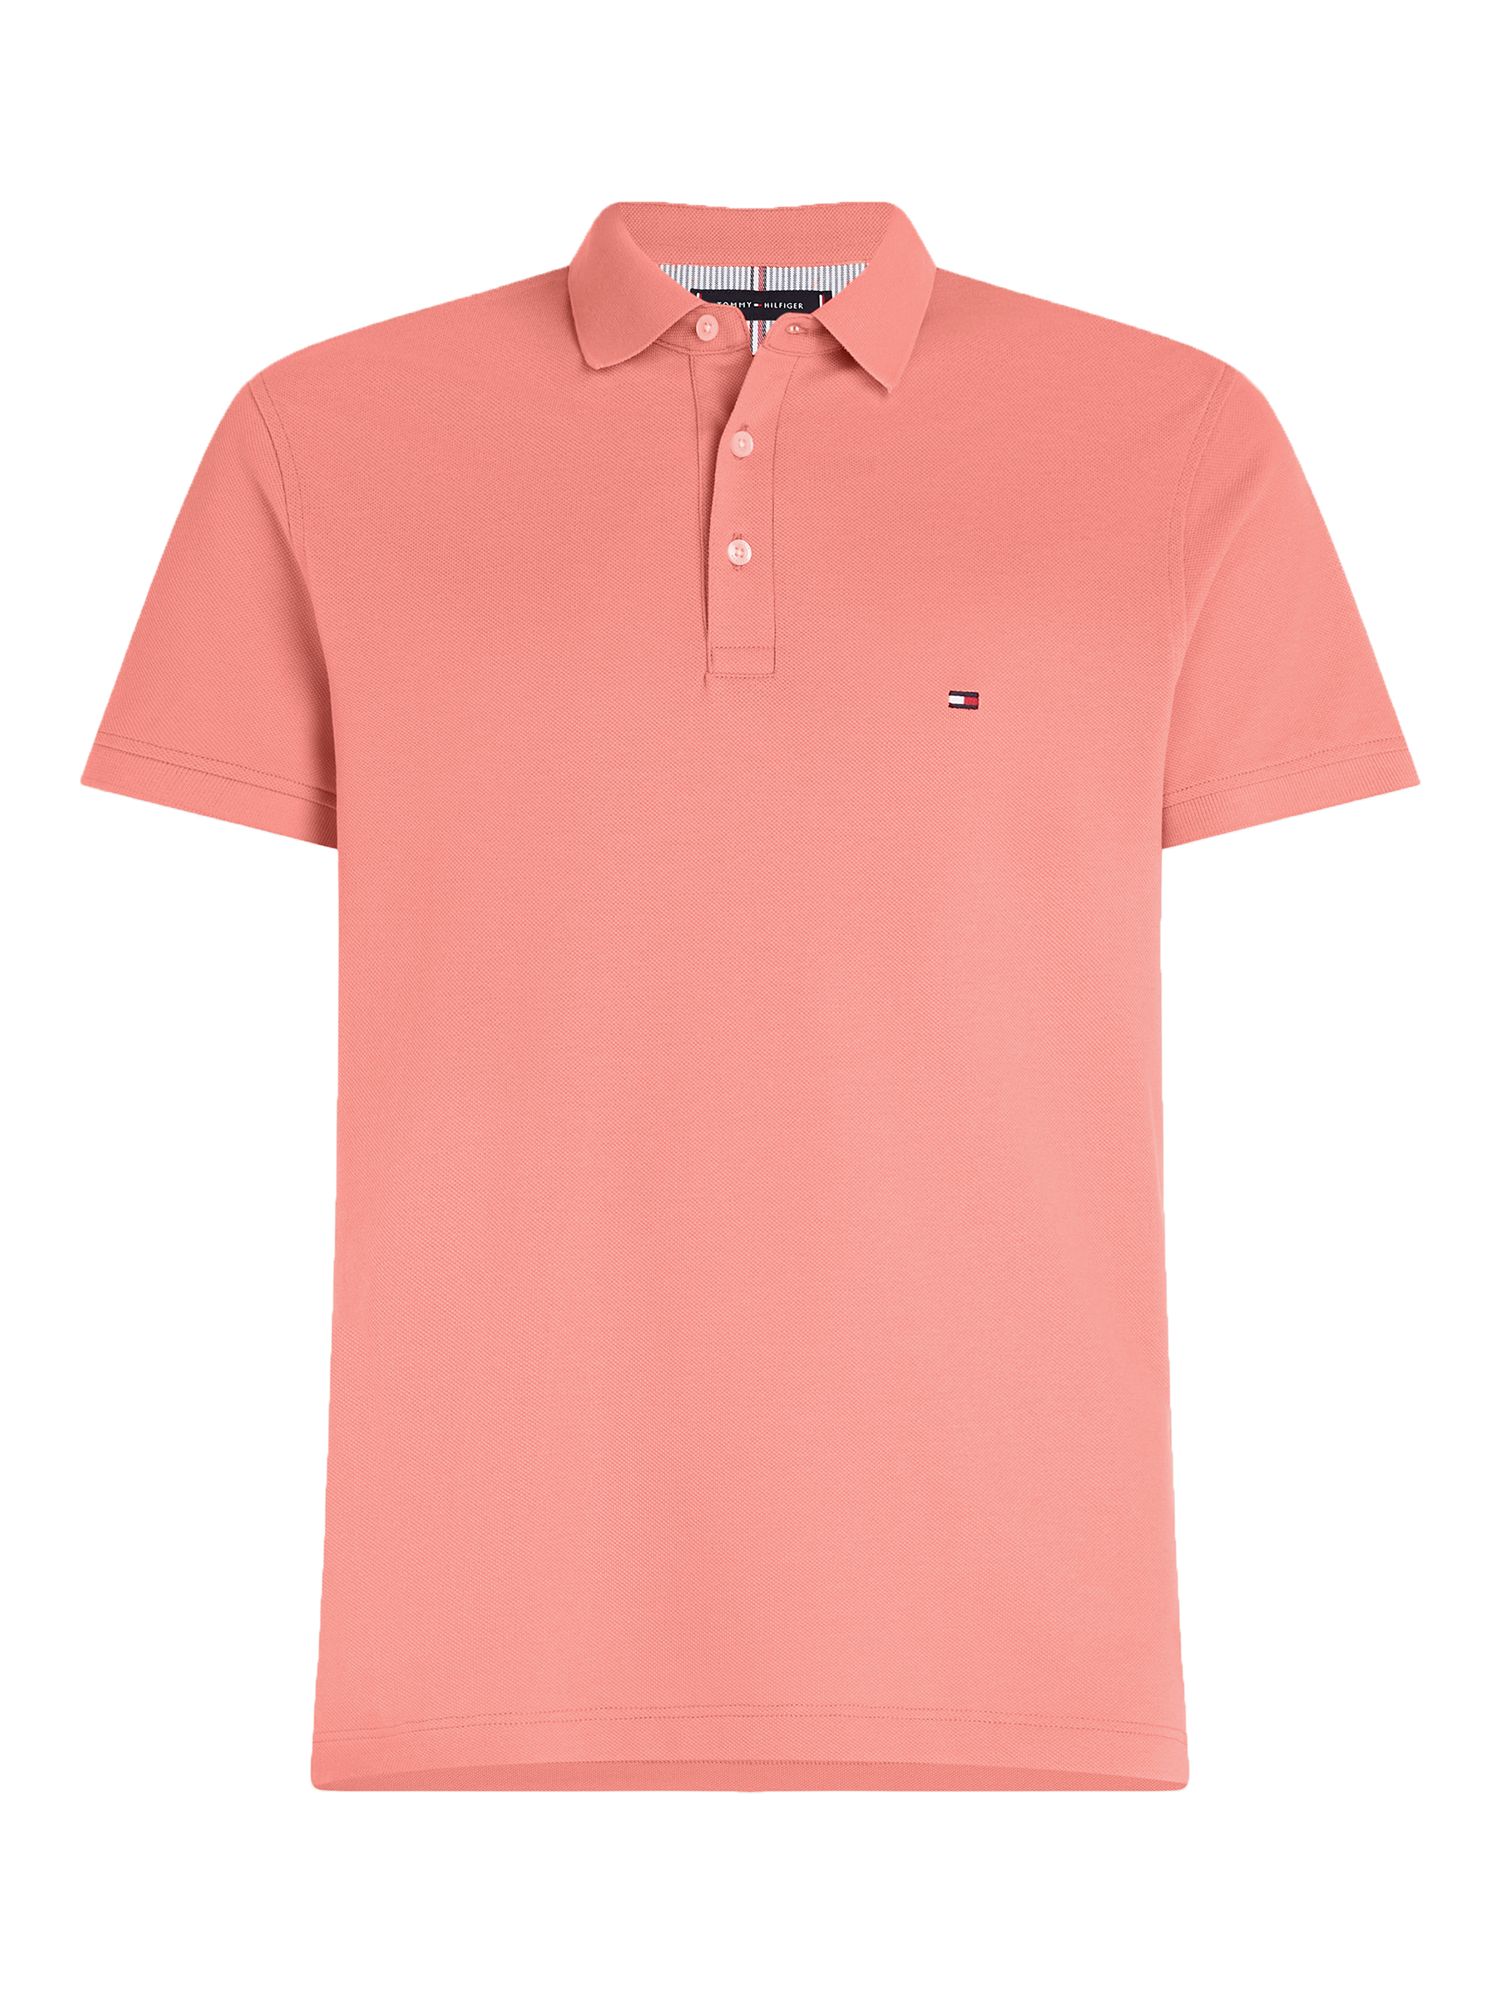 Tommy Hilfiger 1985 Slim Fit Polo Shirt, Peach Dusk at John Lewis & Partners